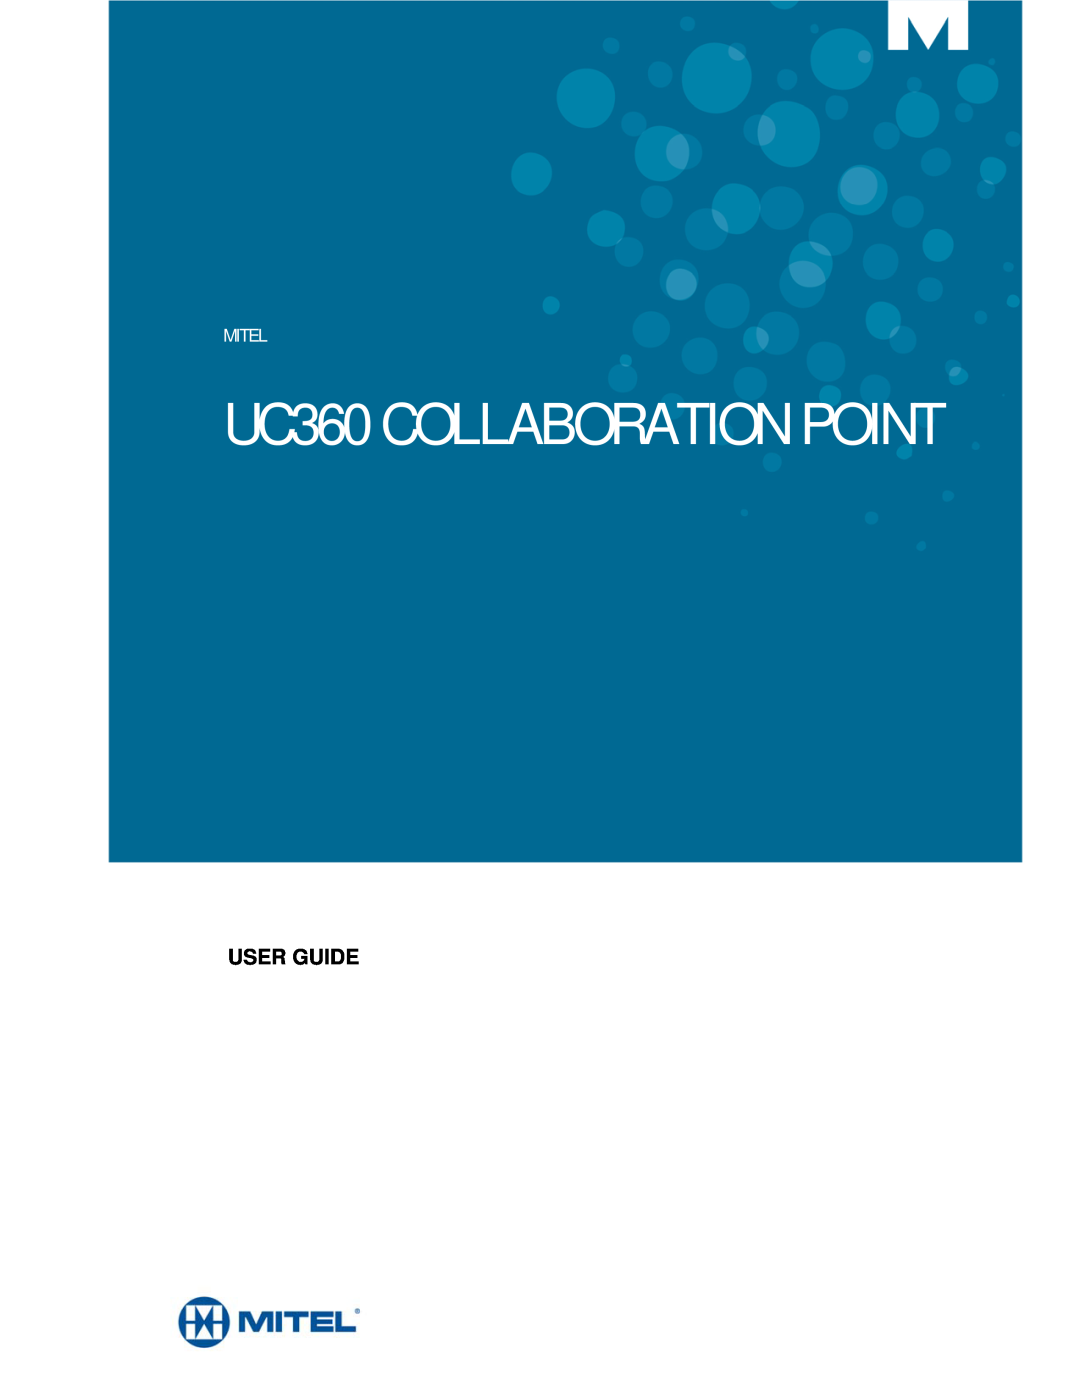 Mitel manual UC360 COLLABORATION POINT, Administration And User Guide, Mitel 